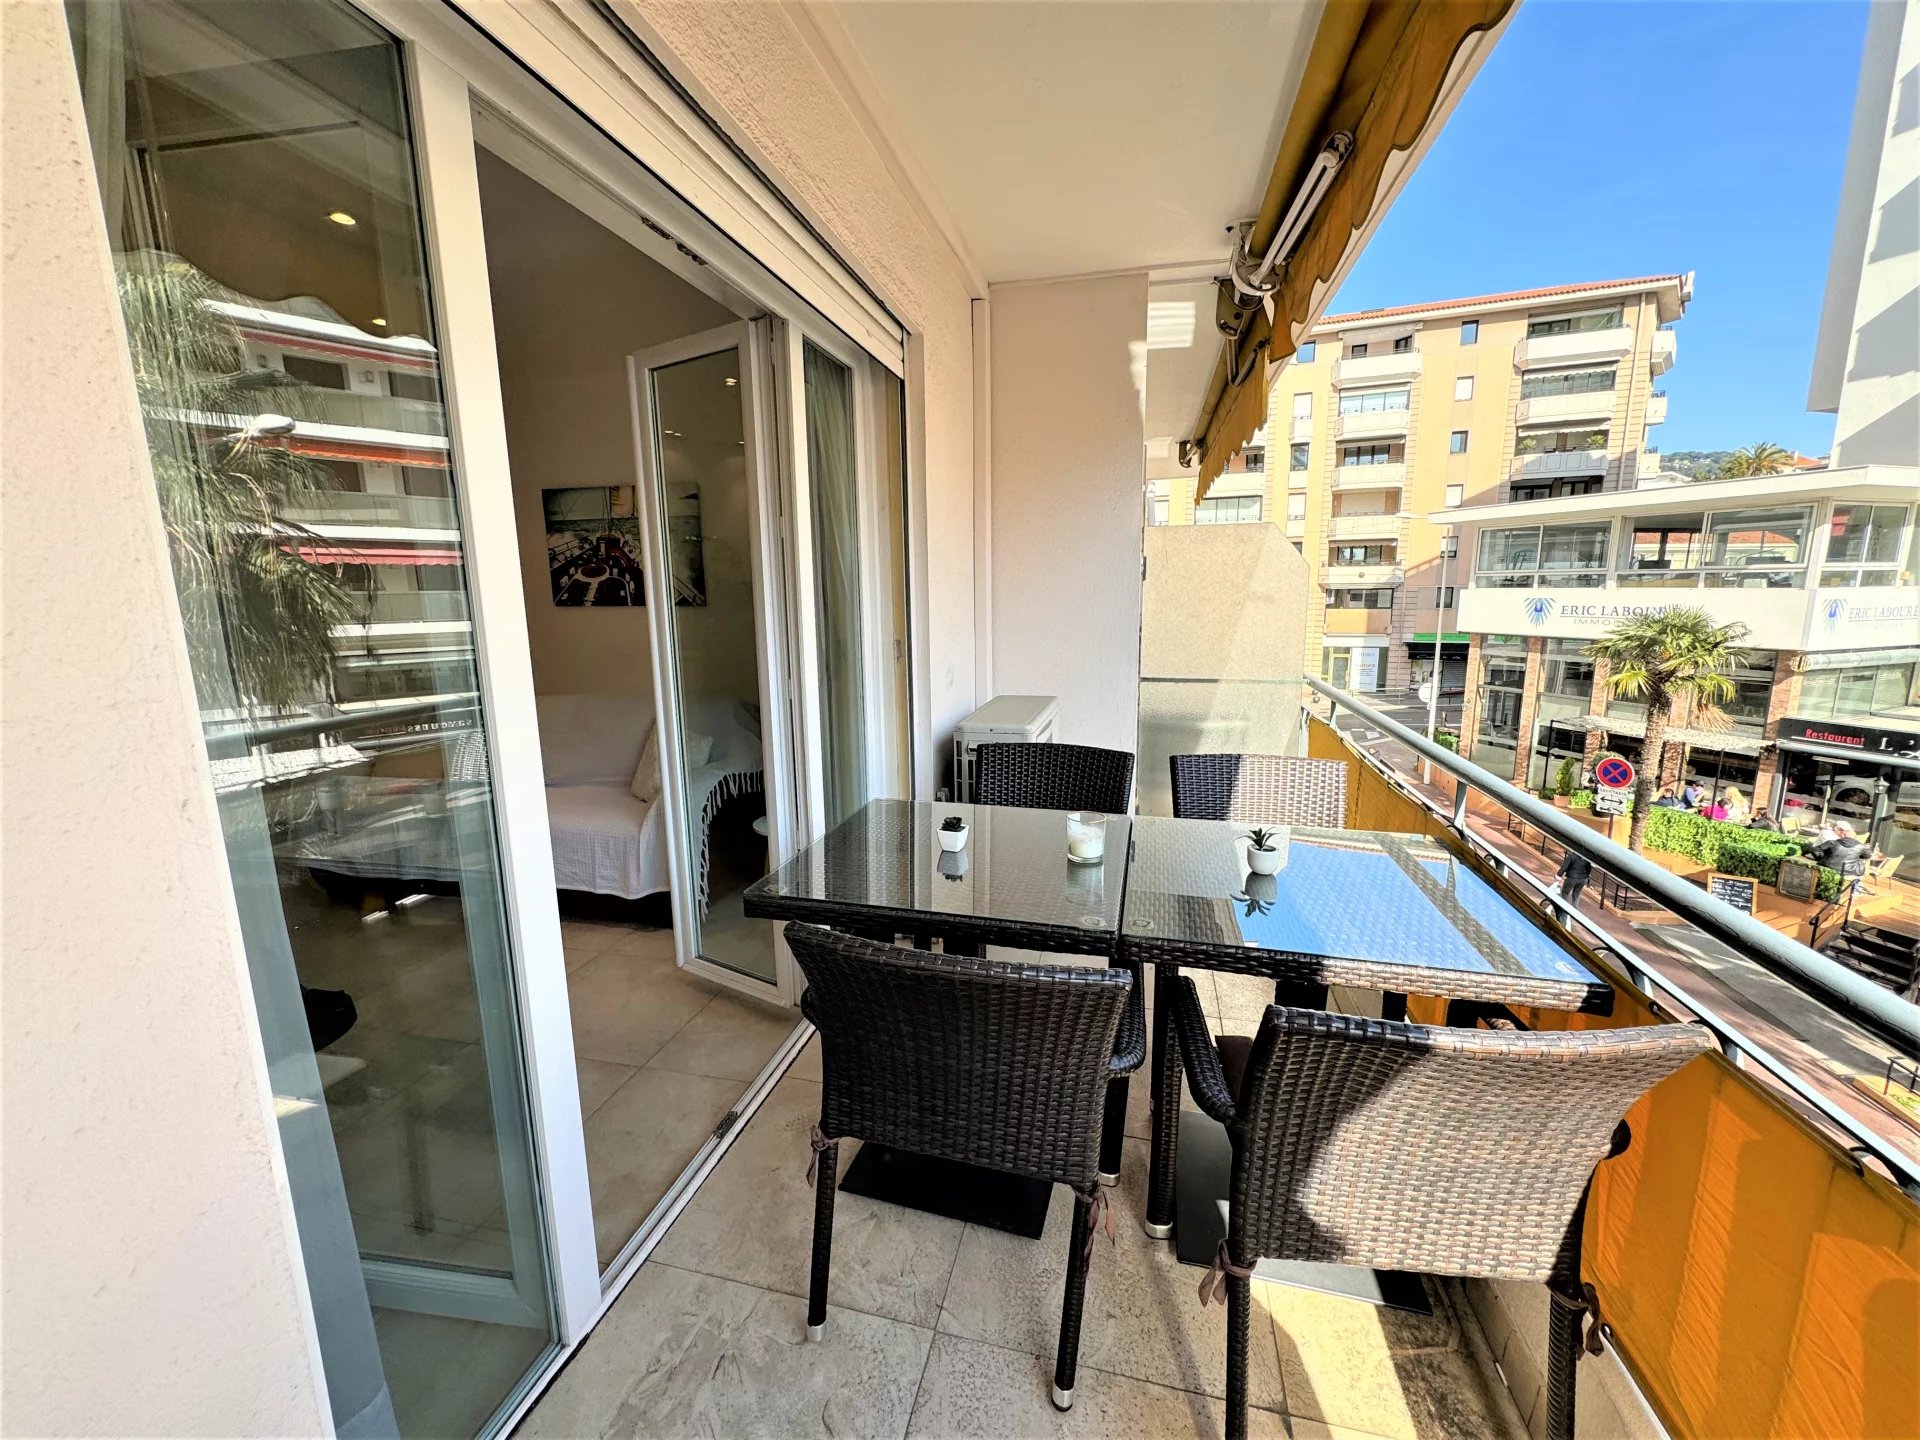 AJC IMMOBILIER CANNES offers Exclusivity Cannes Banane, Magnificent 2 rooms, with terrace 50 meters ...